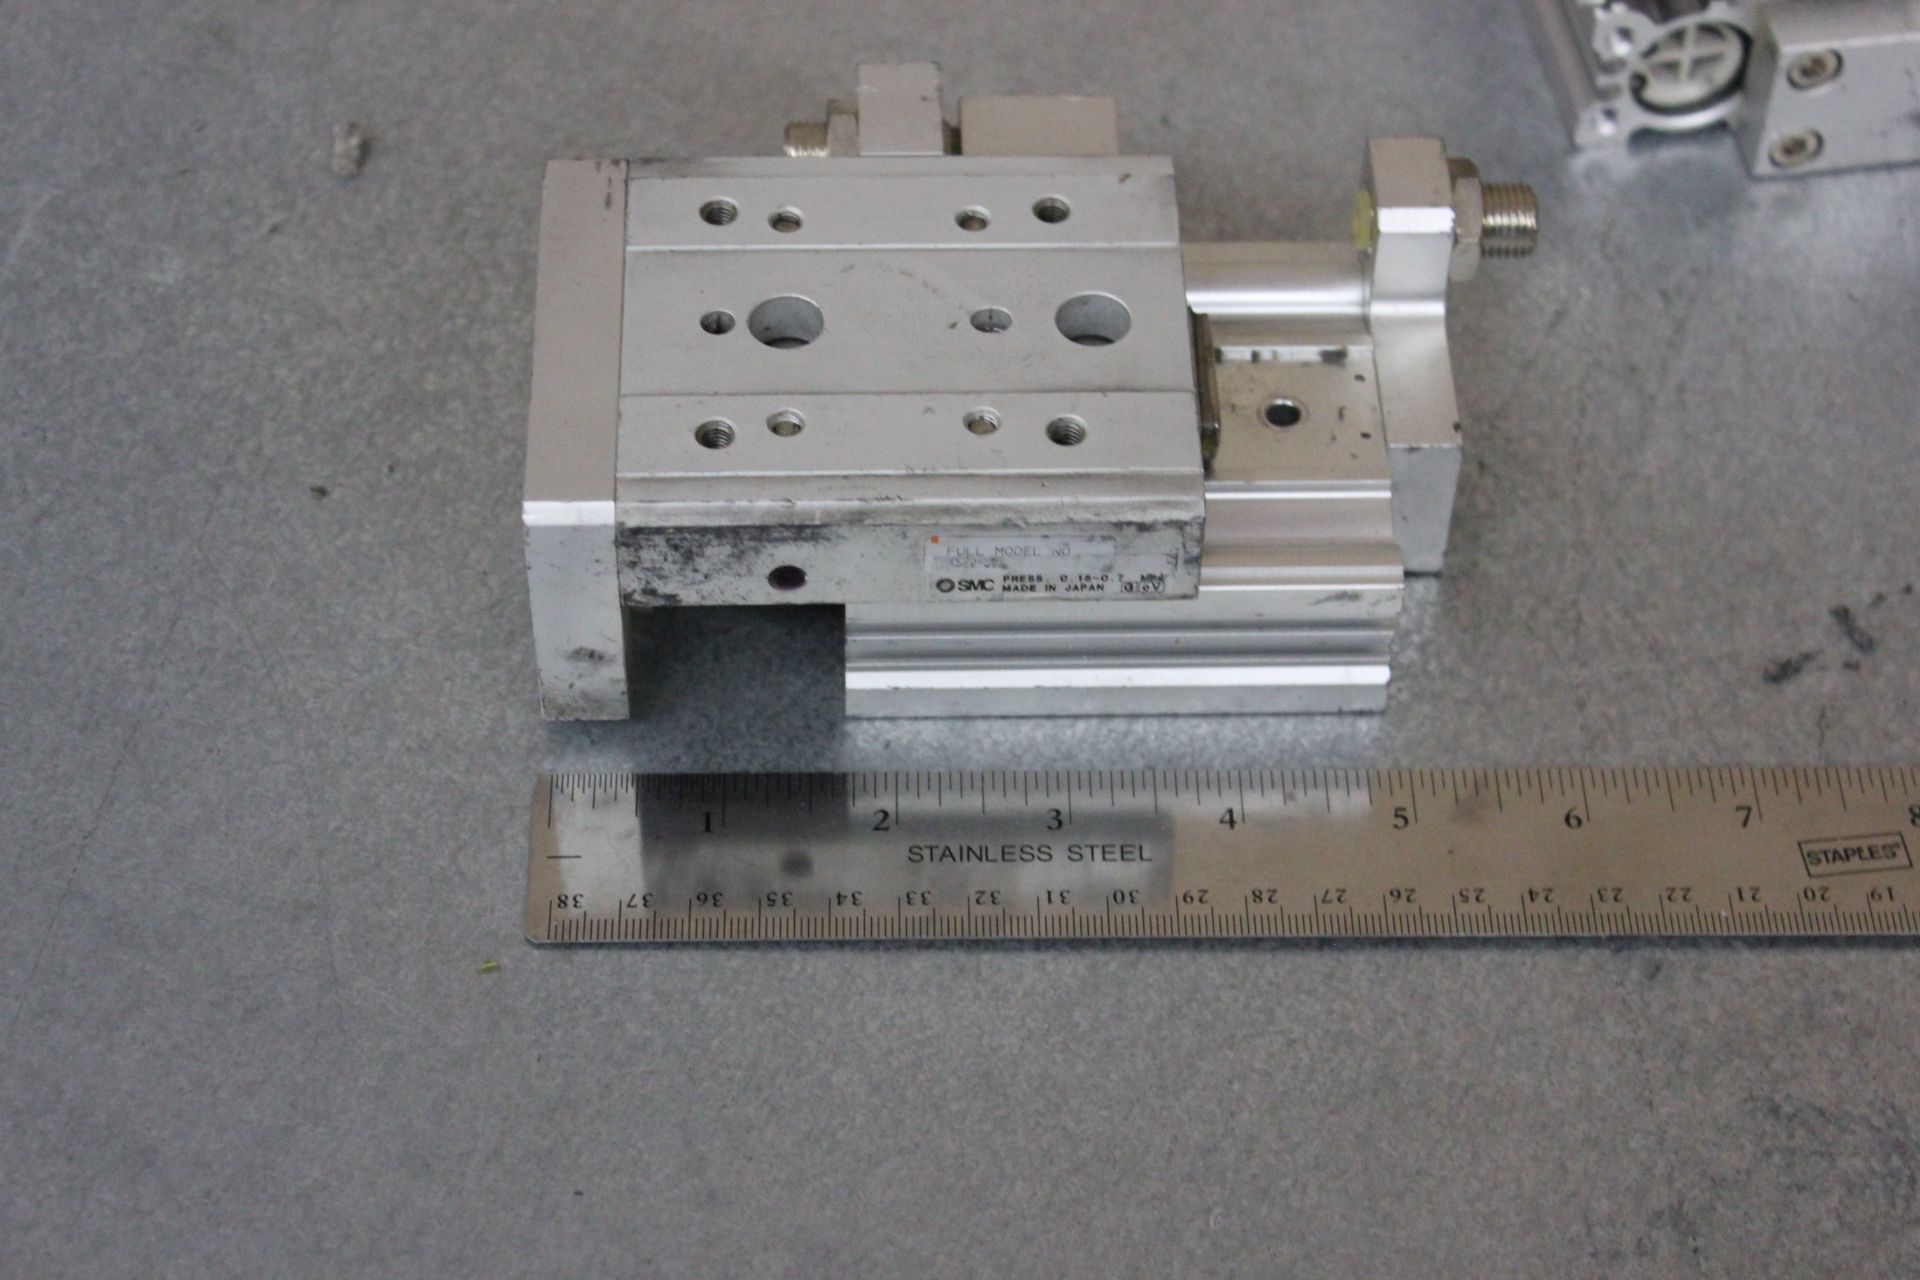 LOT OF SMC LINEAR SLIDE TABLE PNEUMATIC CYLINDERS - Image 5 of 7